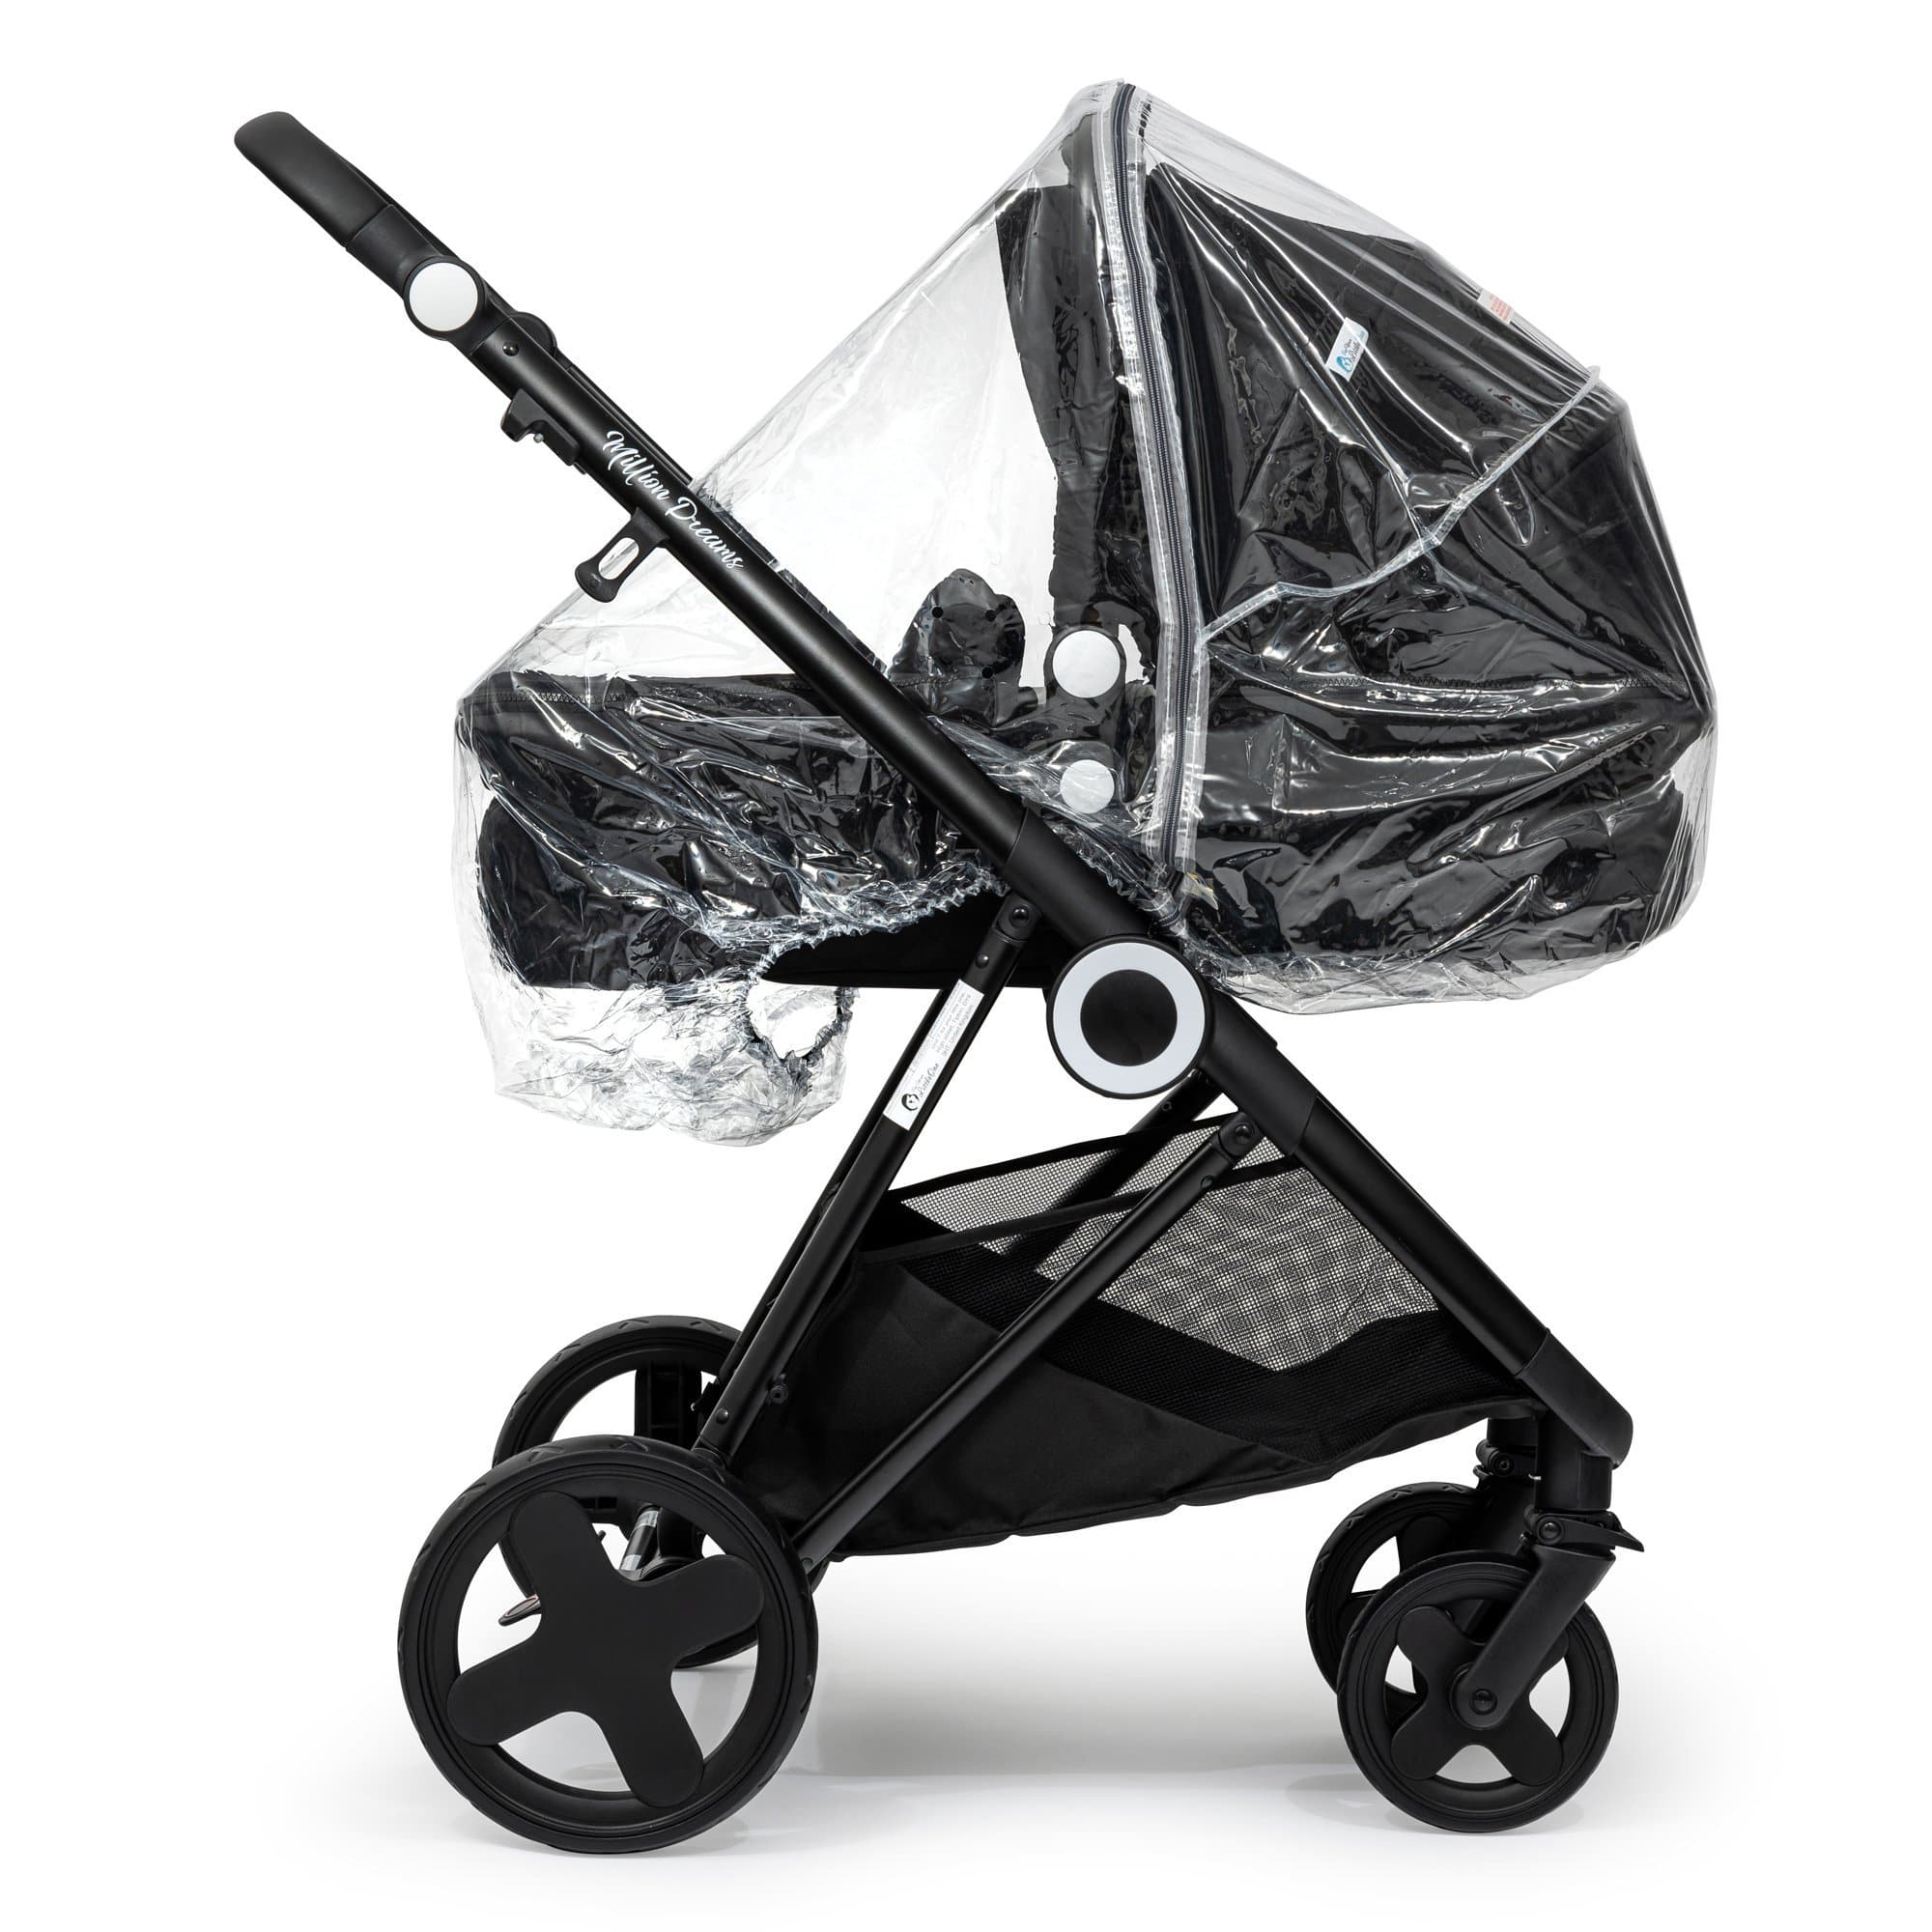 2 in 1 Rain Cover Compatible with Firstwheels - Fits All Models - For Your Little One